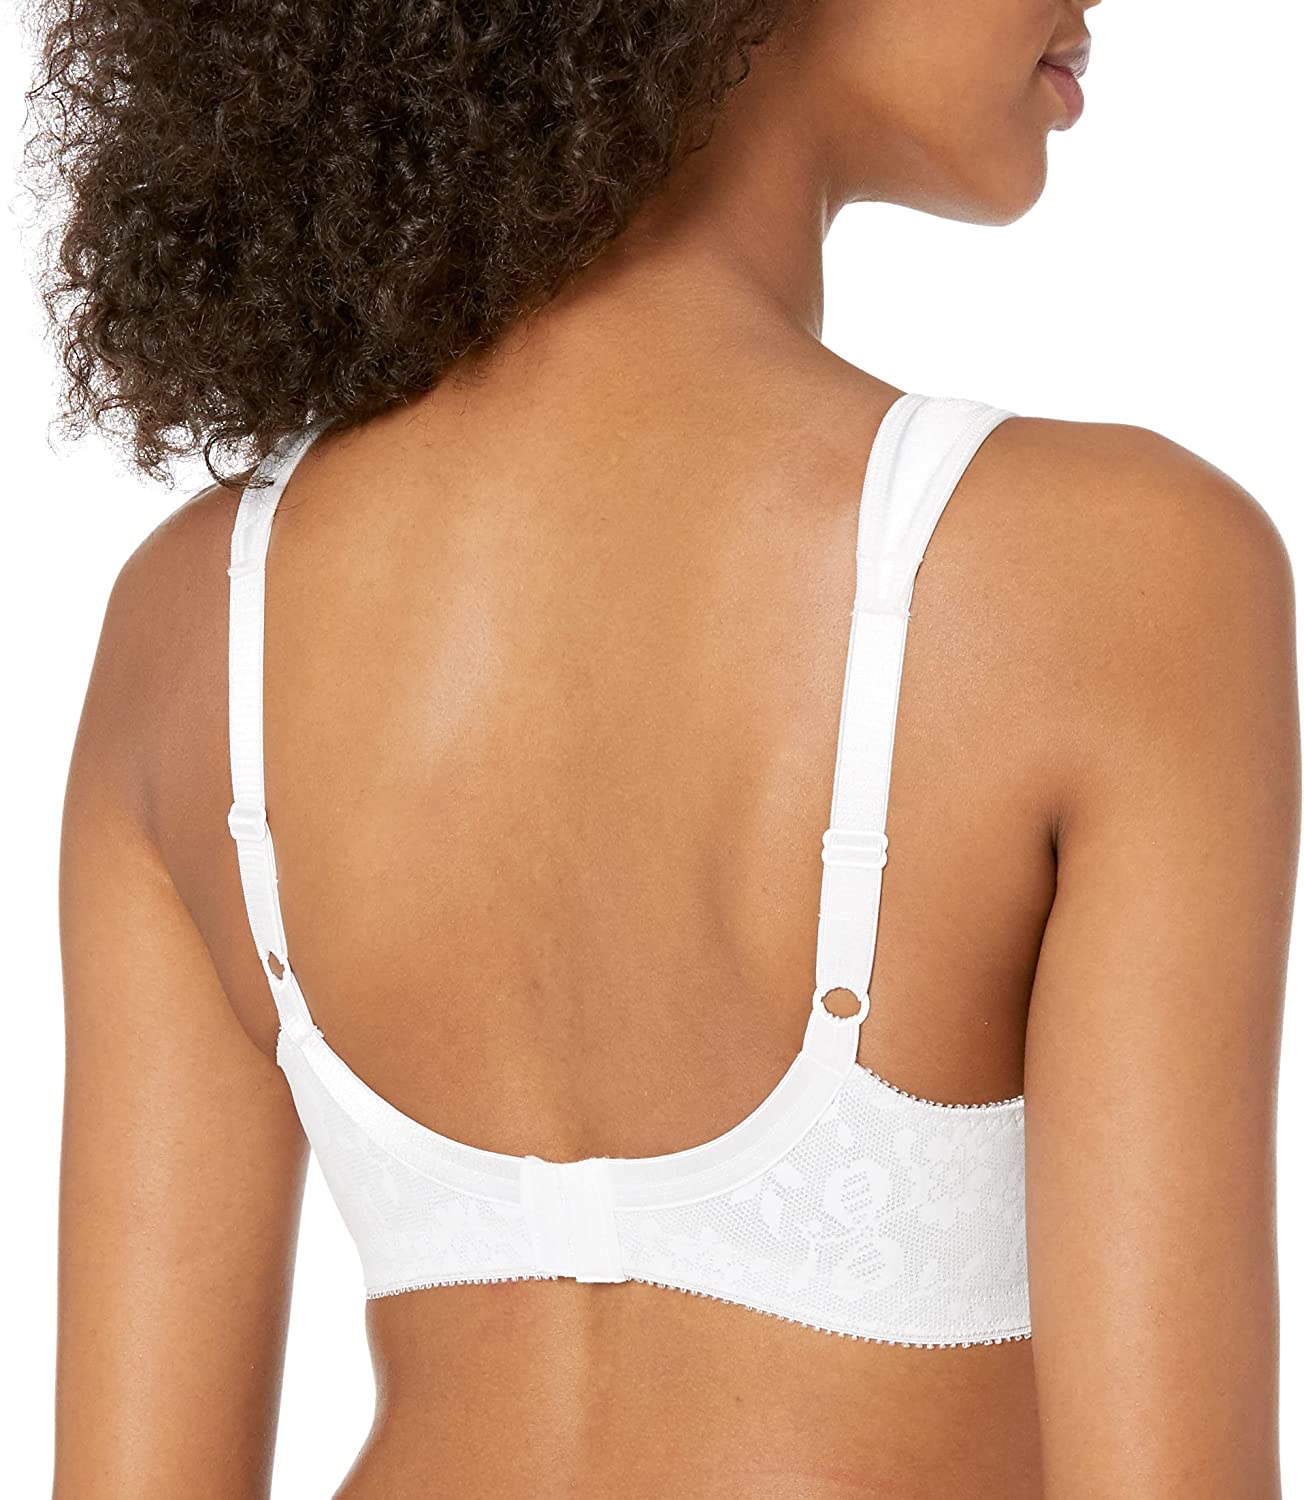 Playtex Wirefree Bra 18 Hour Smoothing Minimizer TruSUPPORT Fully adjustable